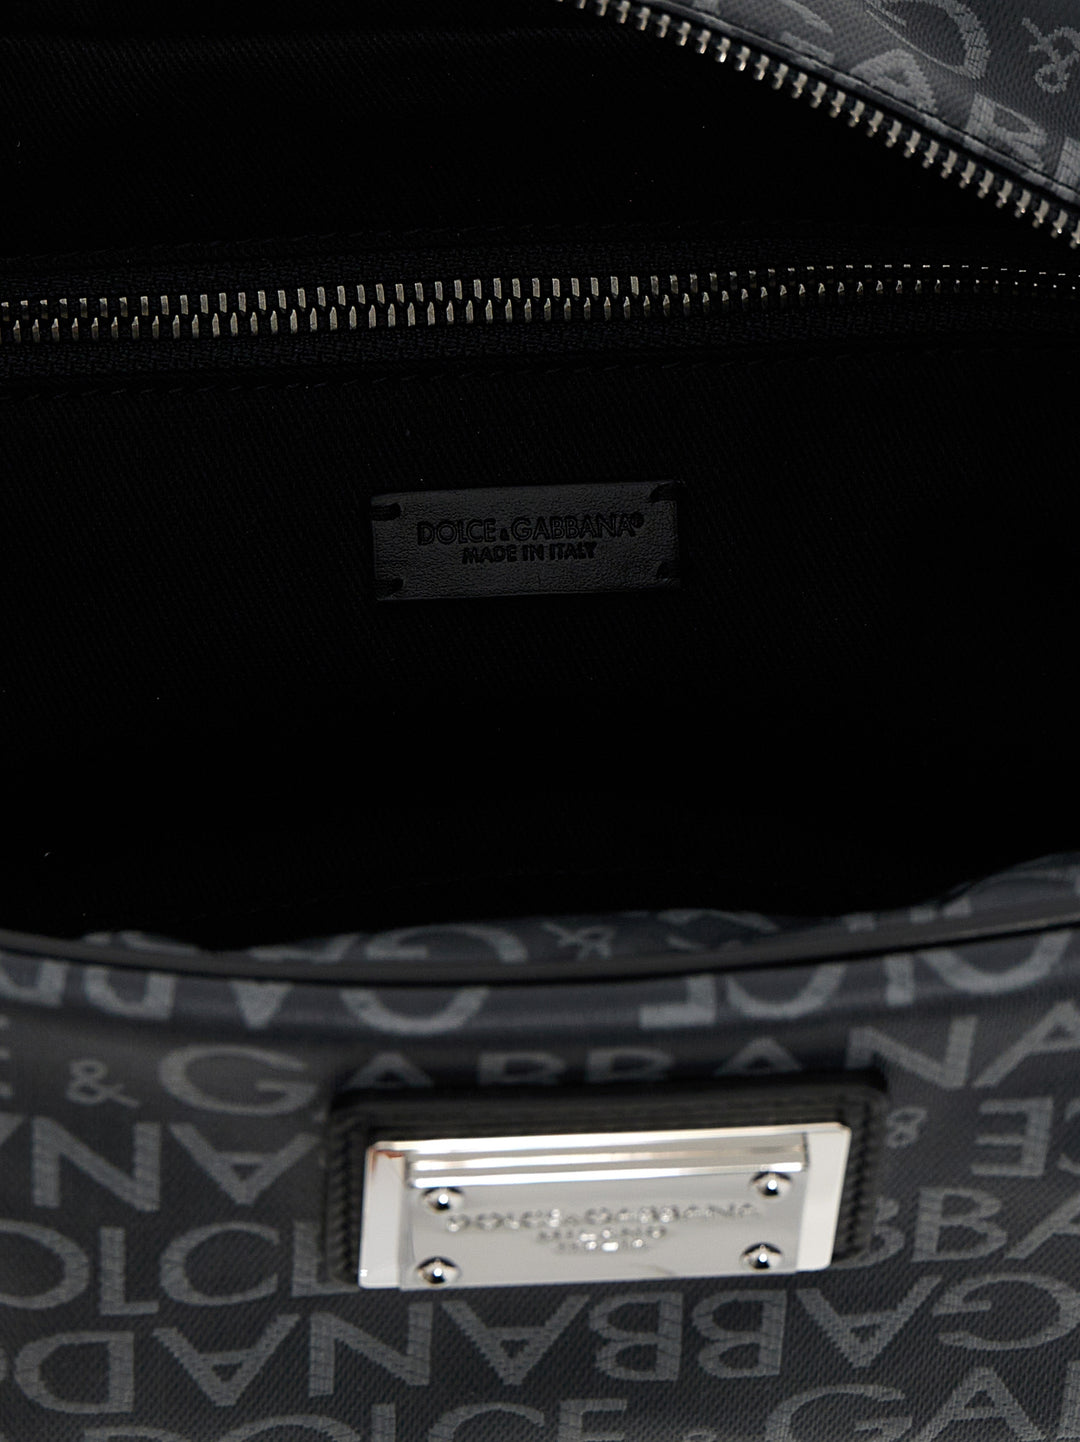 Leather Toiletry Bag Beauty Nero